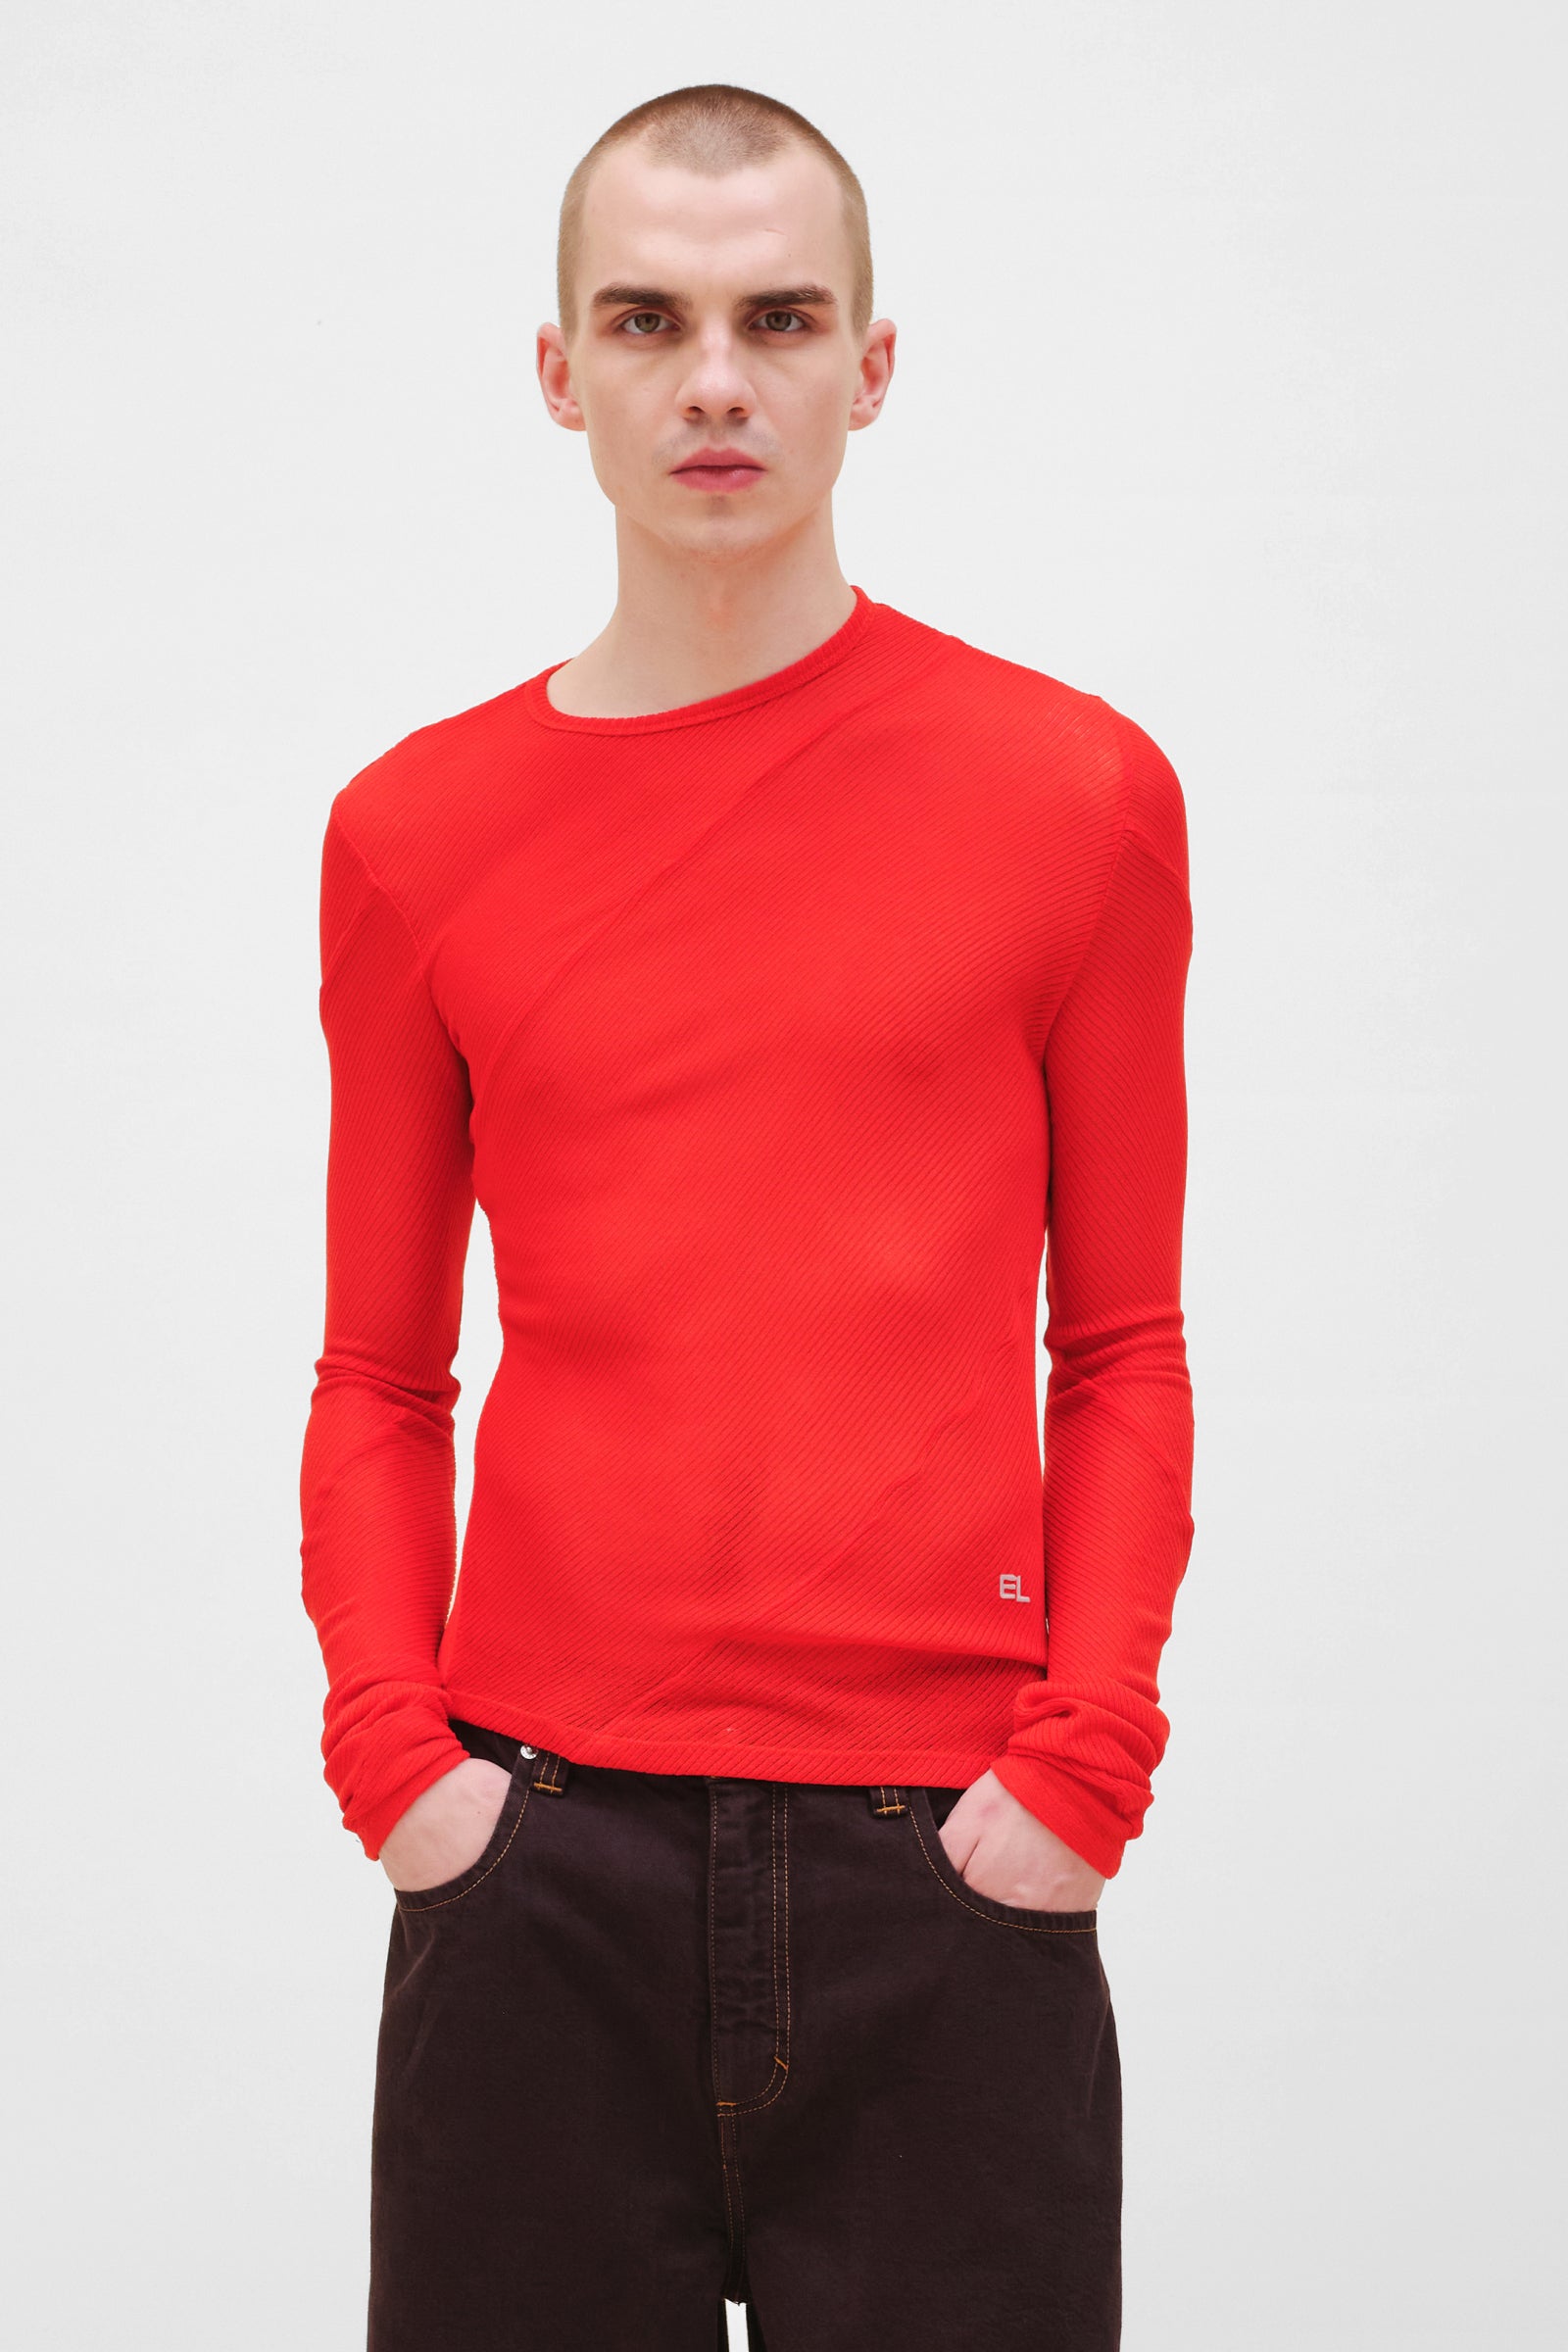 Spiral Long Sleeve in Red by Eckhaus Latta